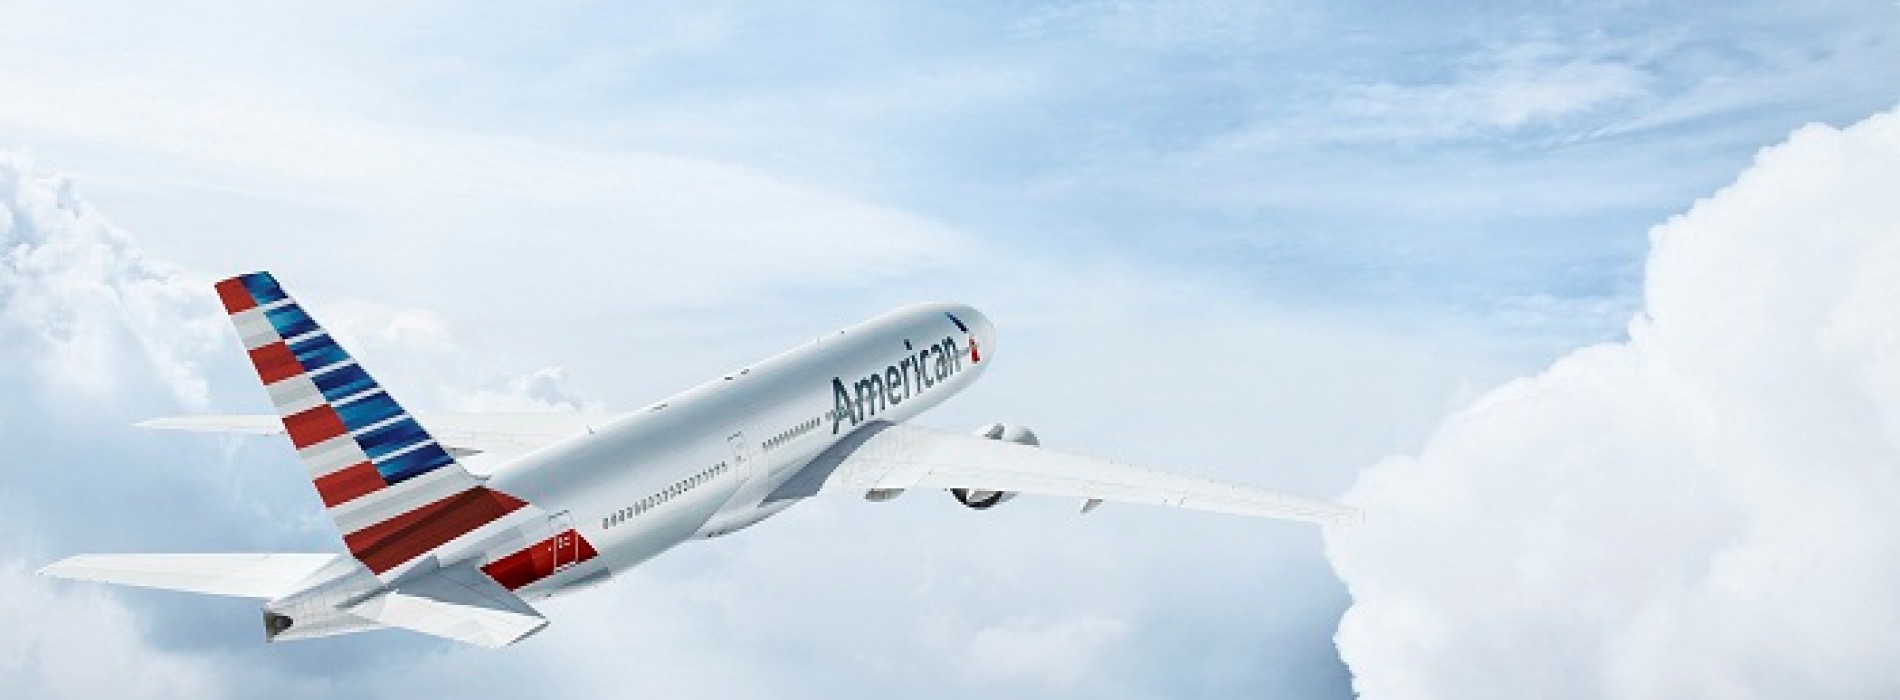 Additional baggage allowance for students in American Airlines